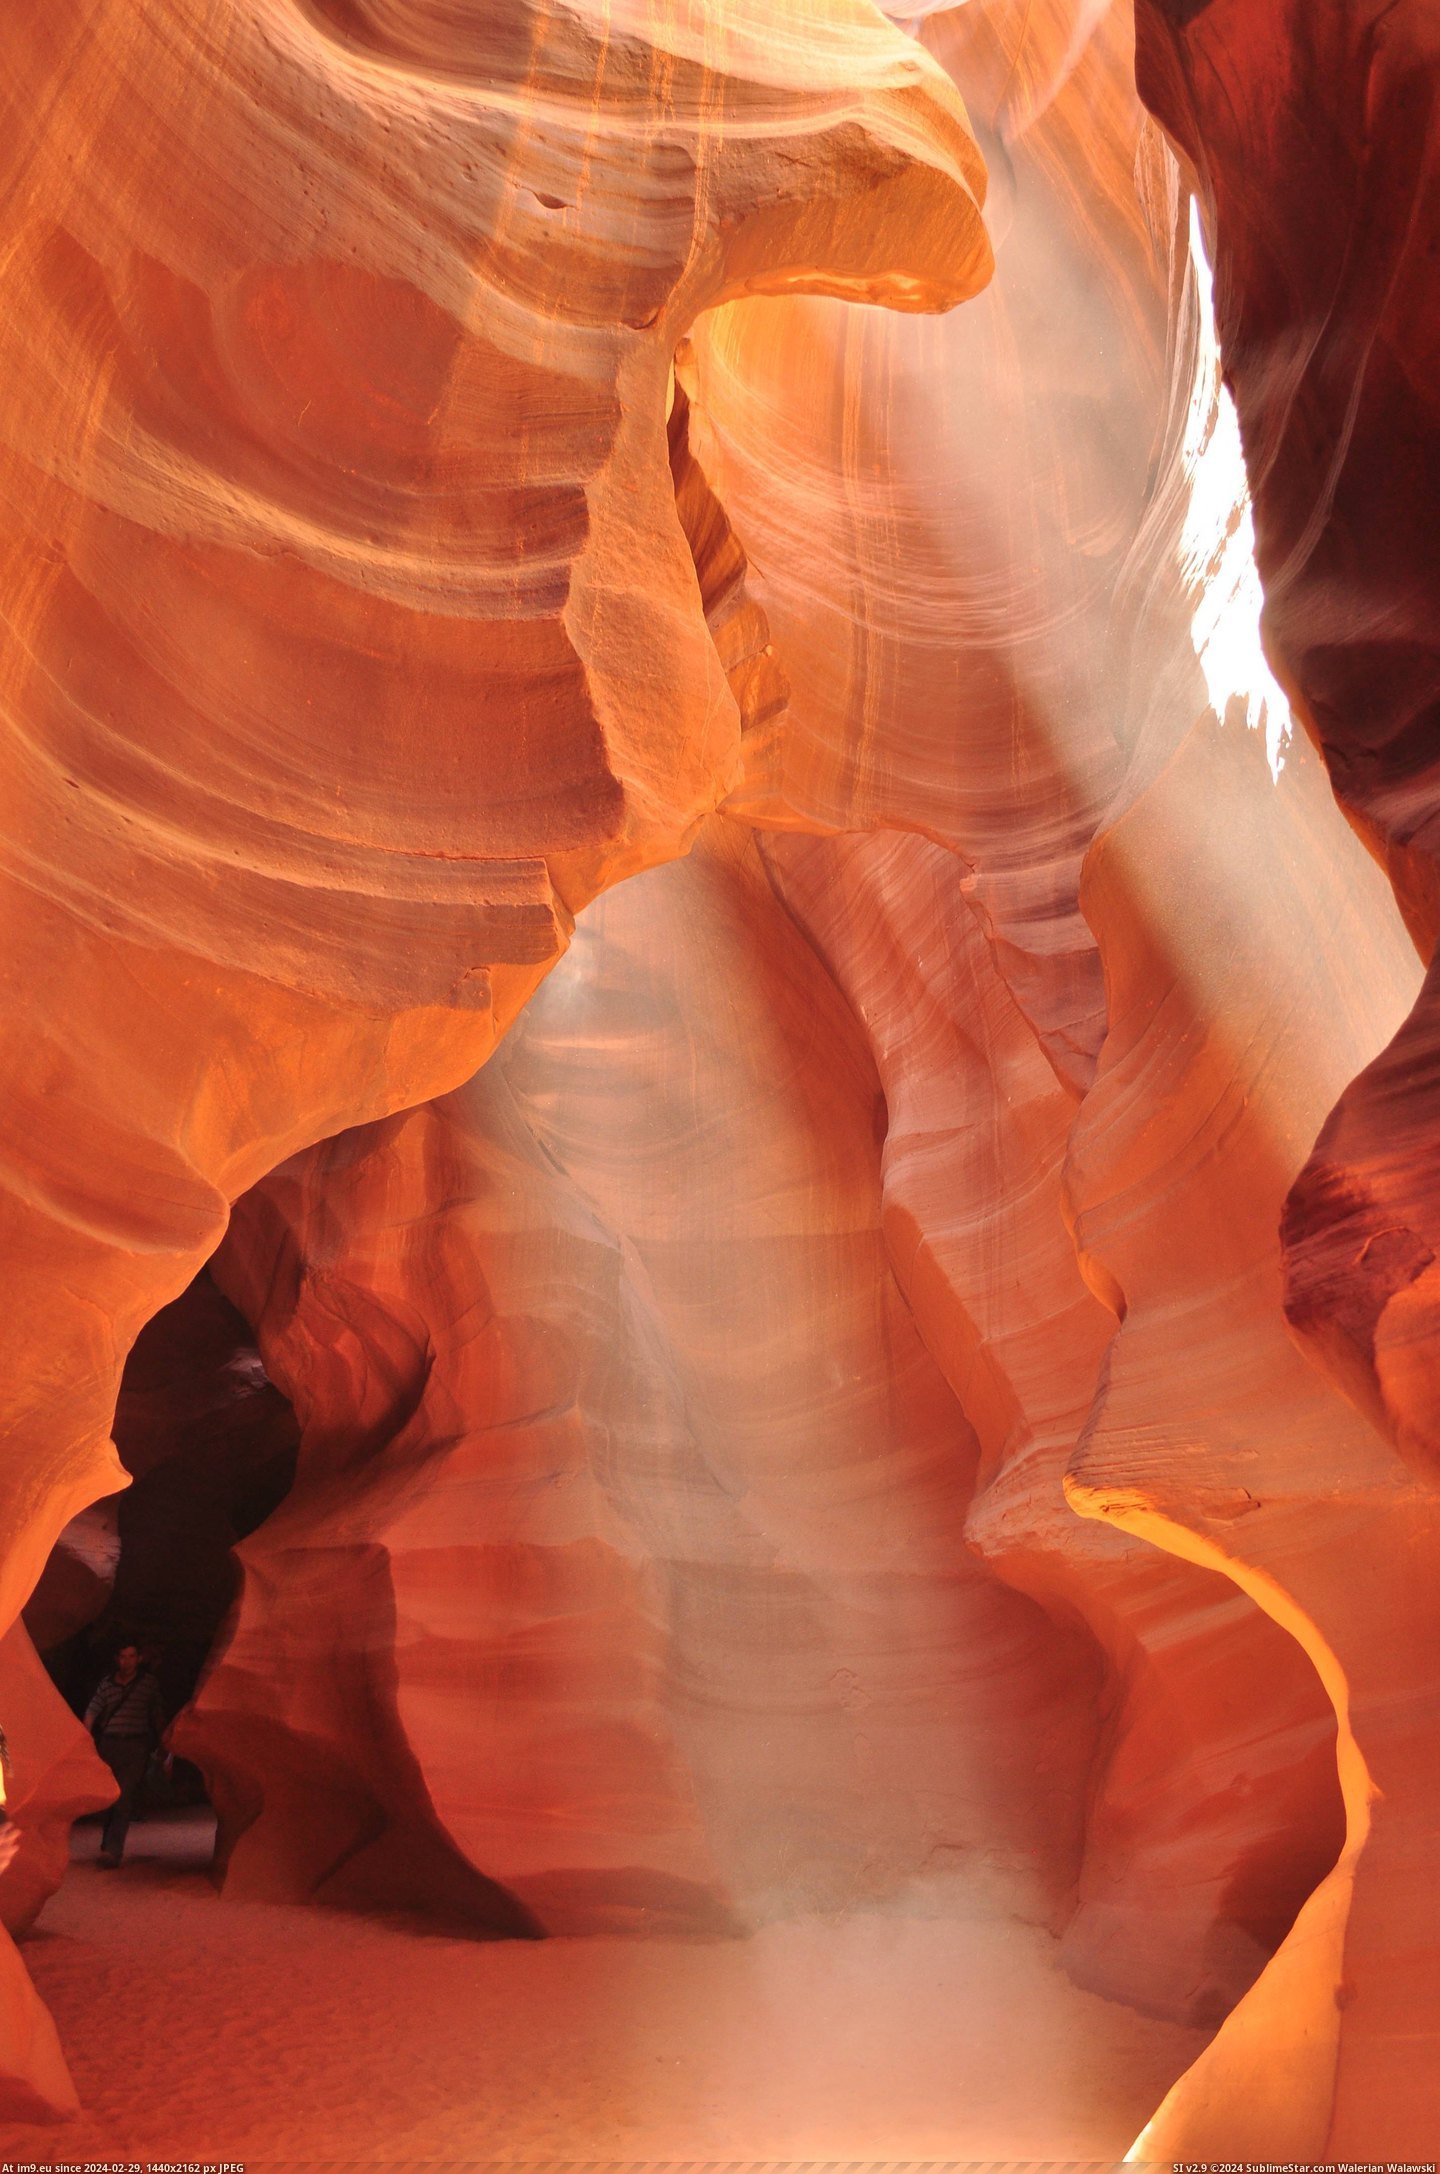 #Photos #Favorite #Walked #Antelope #2848x4288 #Left #Canyon [Earthporn] [OC] Walked through Antelope Canyon and left with 100+ photos, this was my favorite [2848x4288] Pic. (Bild von album My r/EARTHPORN favs))